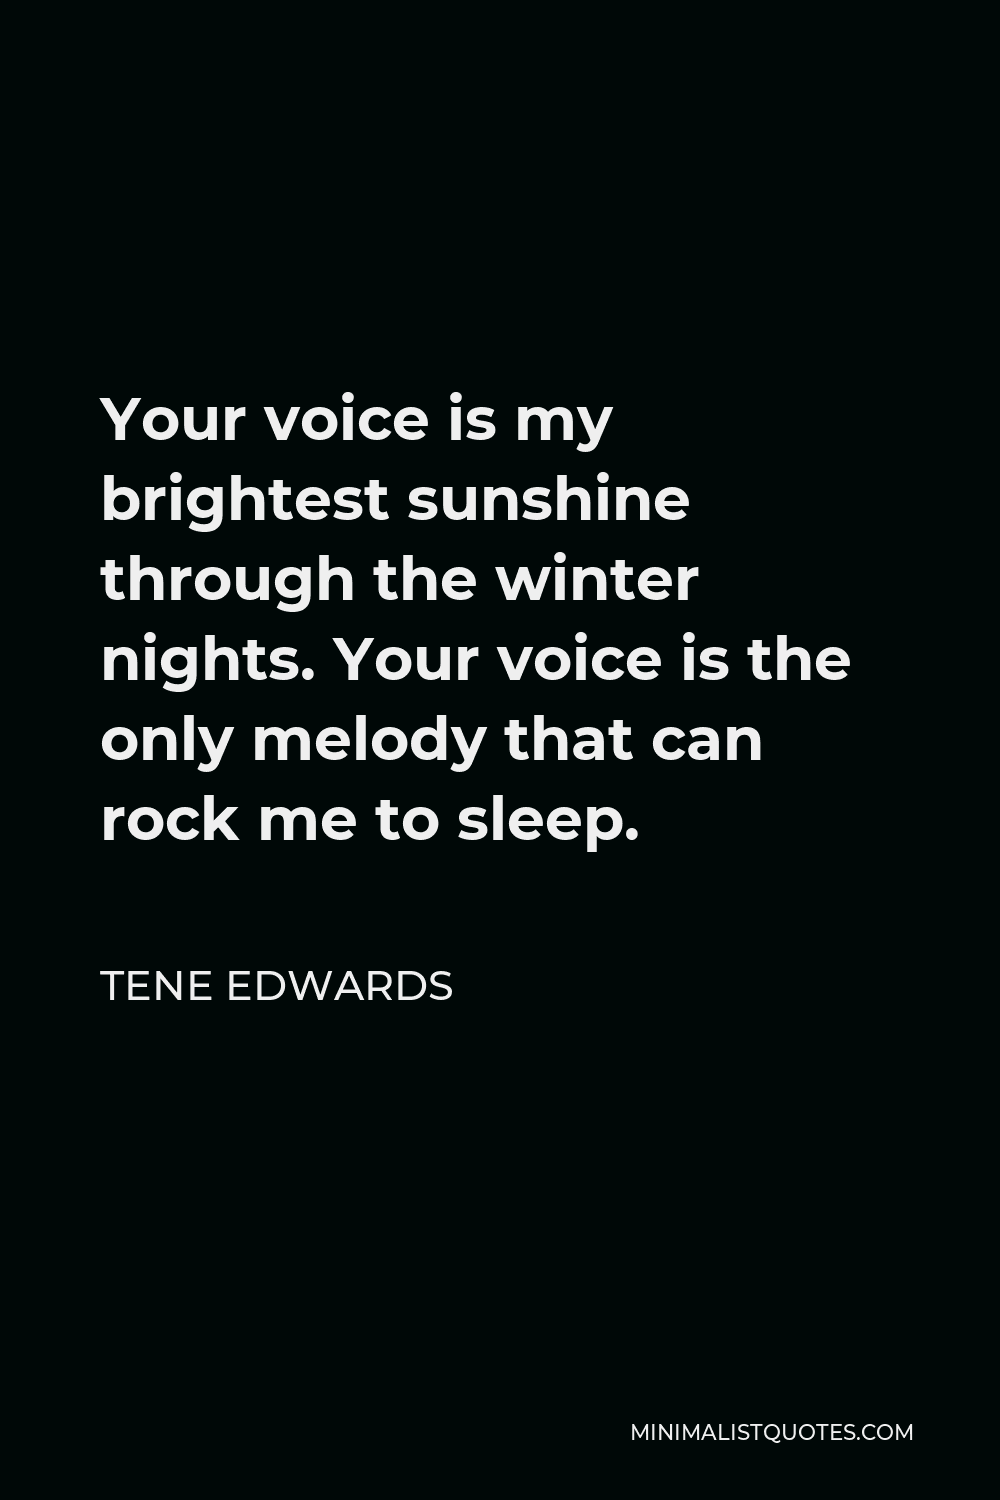 Tene Edwards Quote - Your voice is my brightest sunshine through the winter nights. Your voice is the only melody that can rock me to sleep.